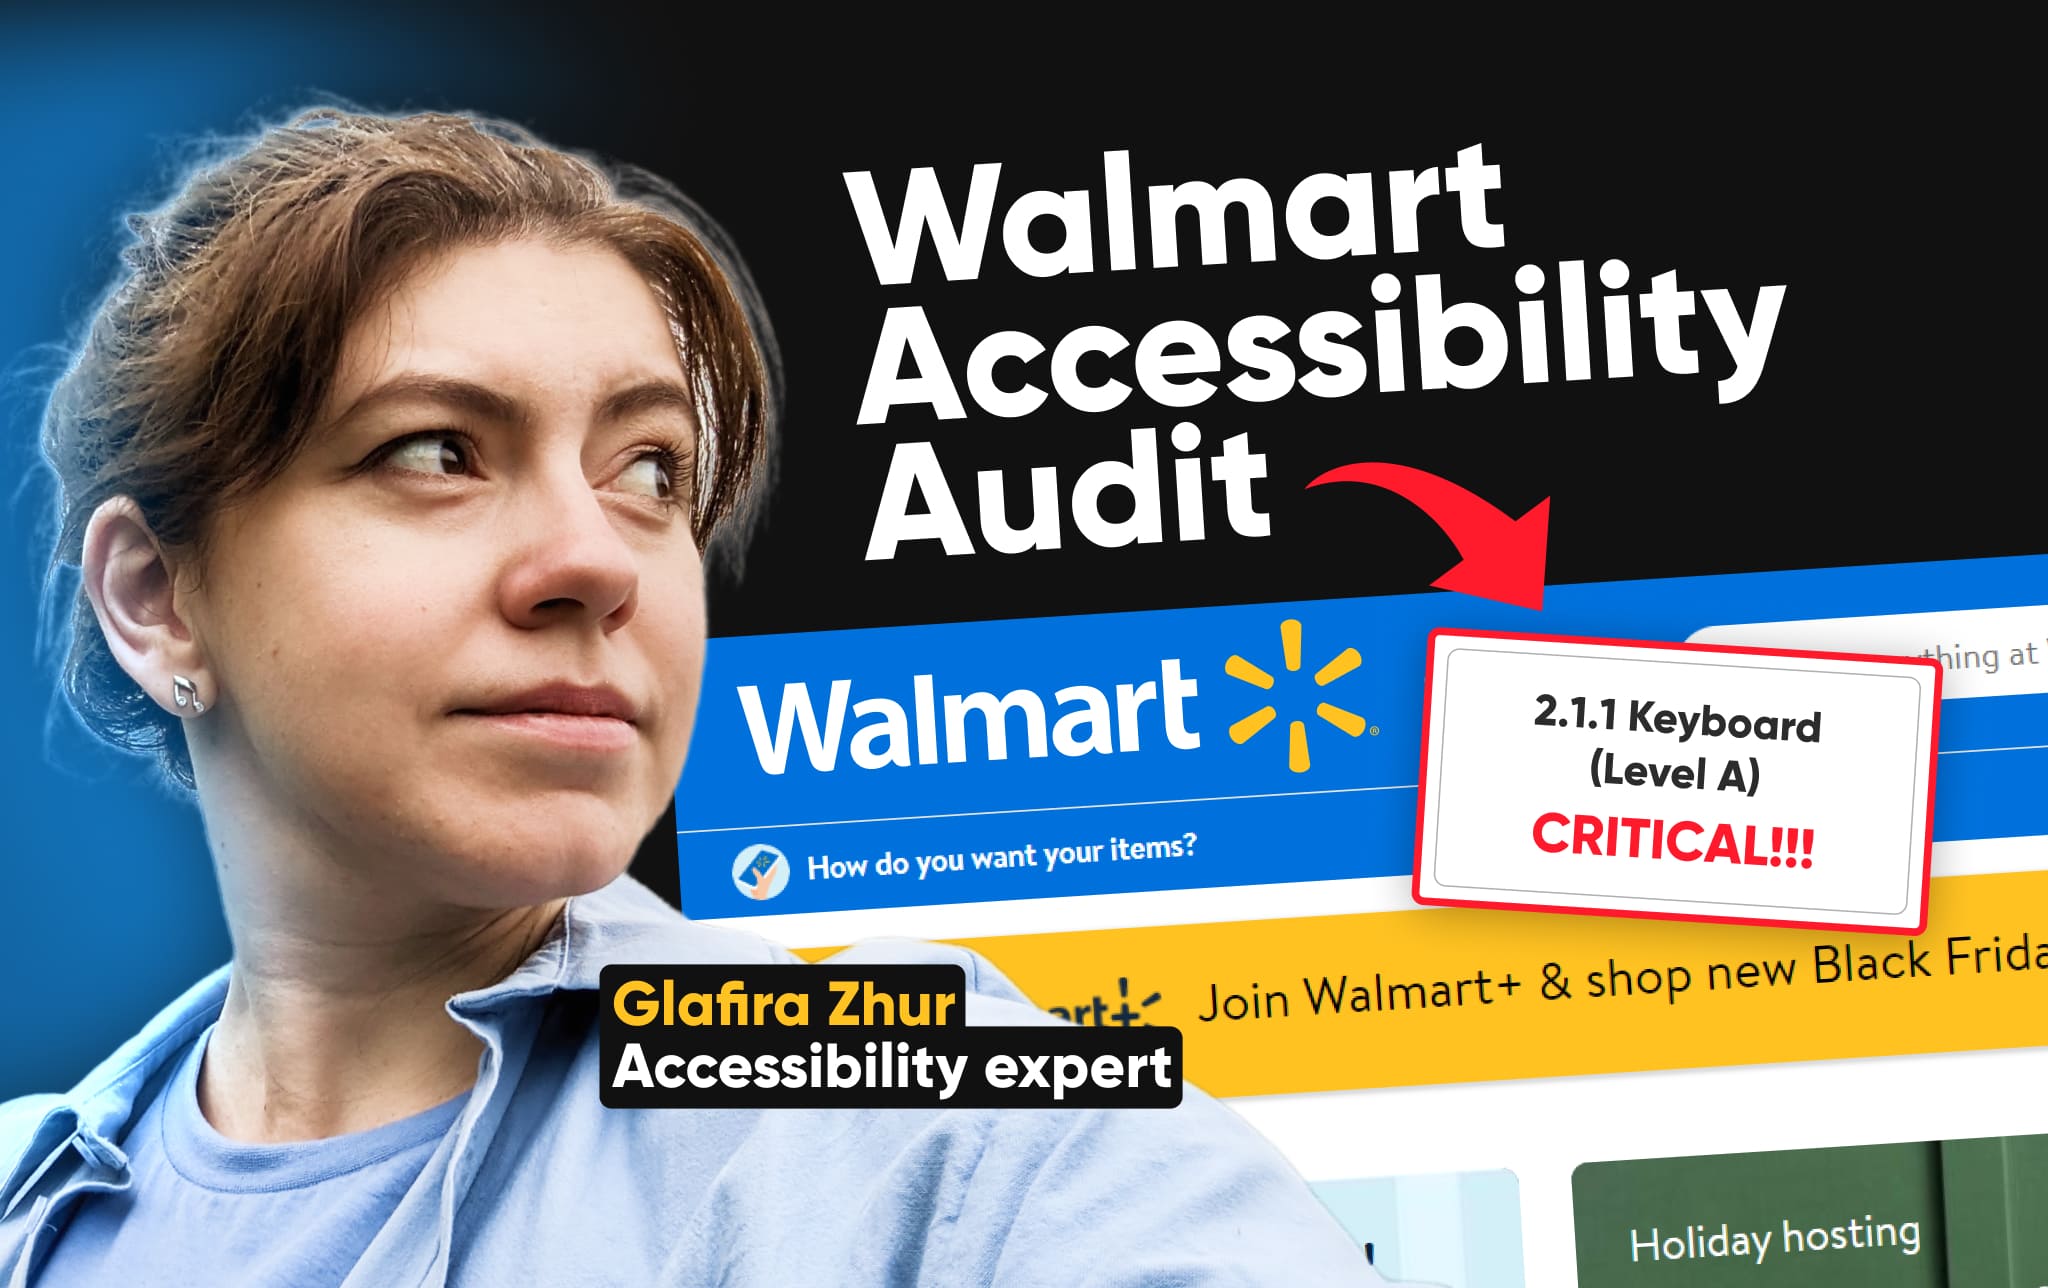 Accessibility audit of the Walmart marketplace: is it as accessible as stated